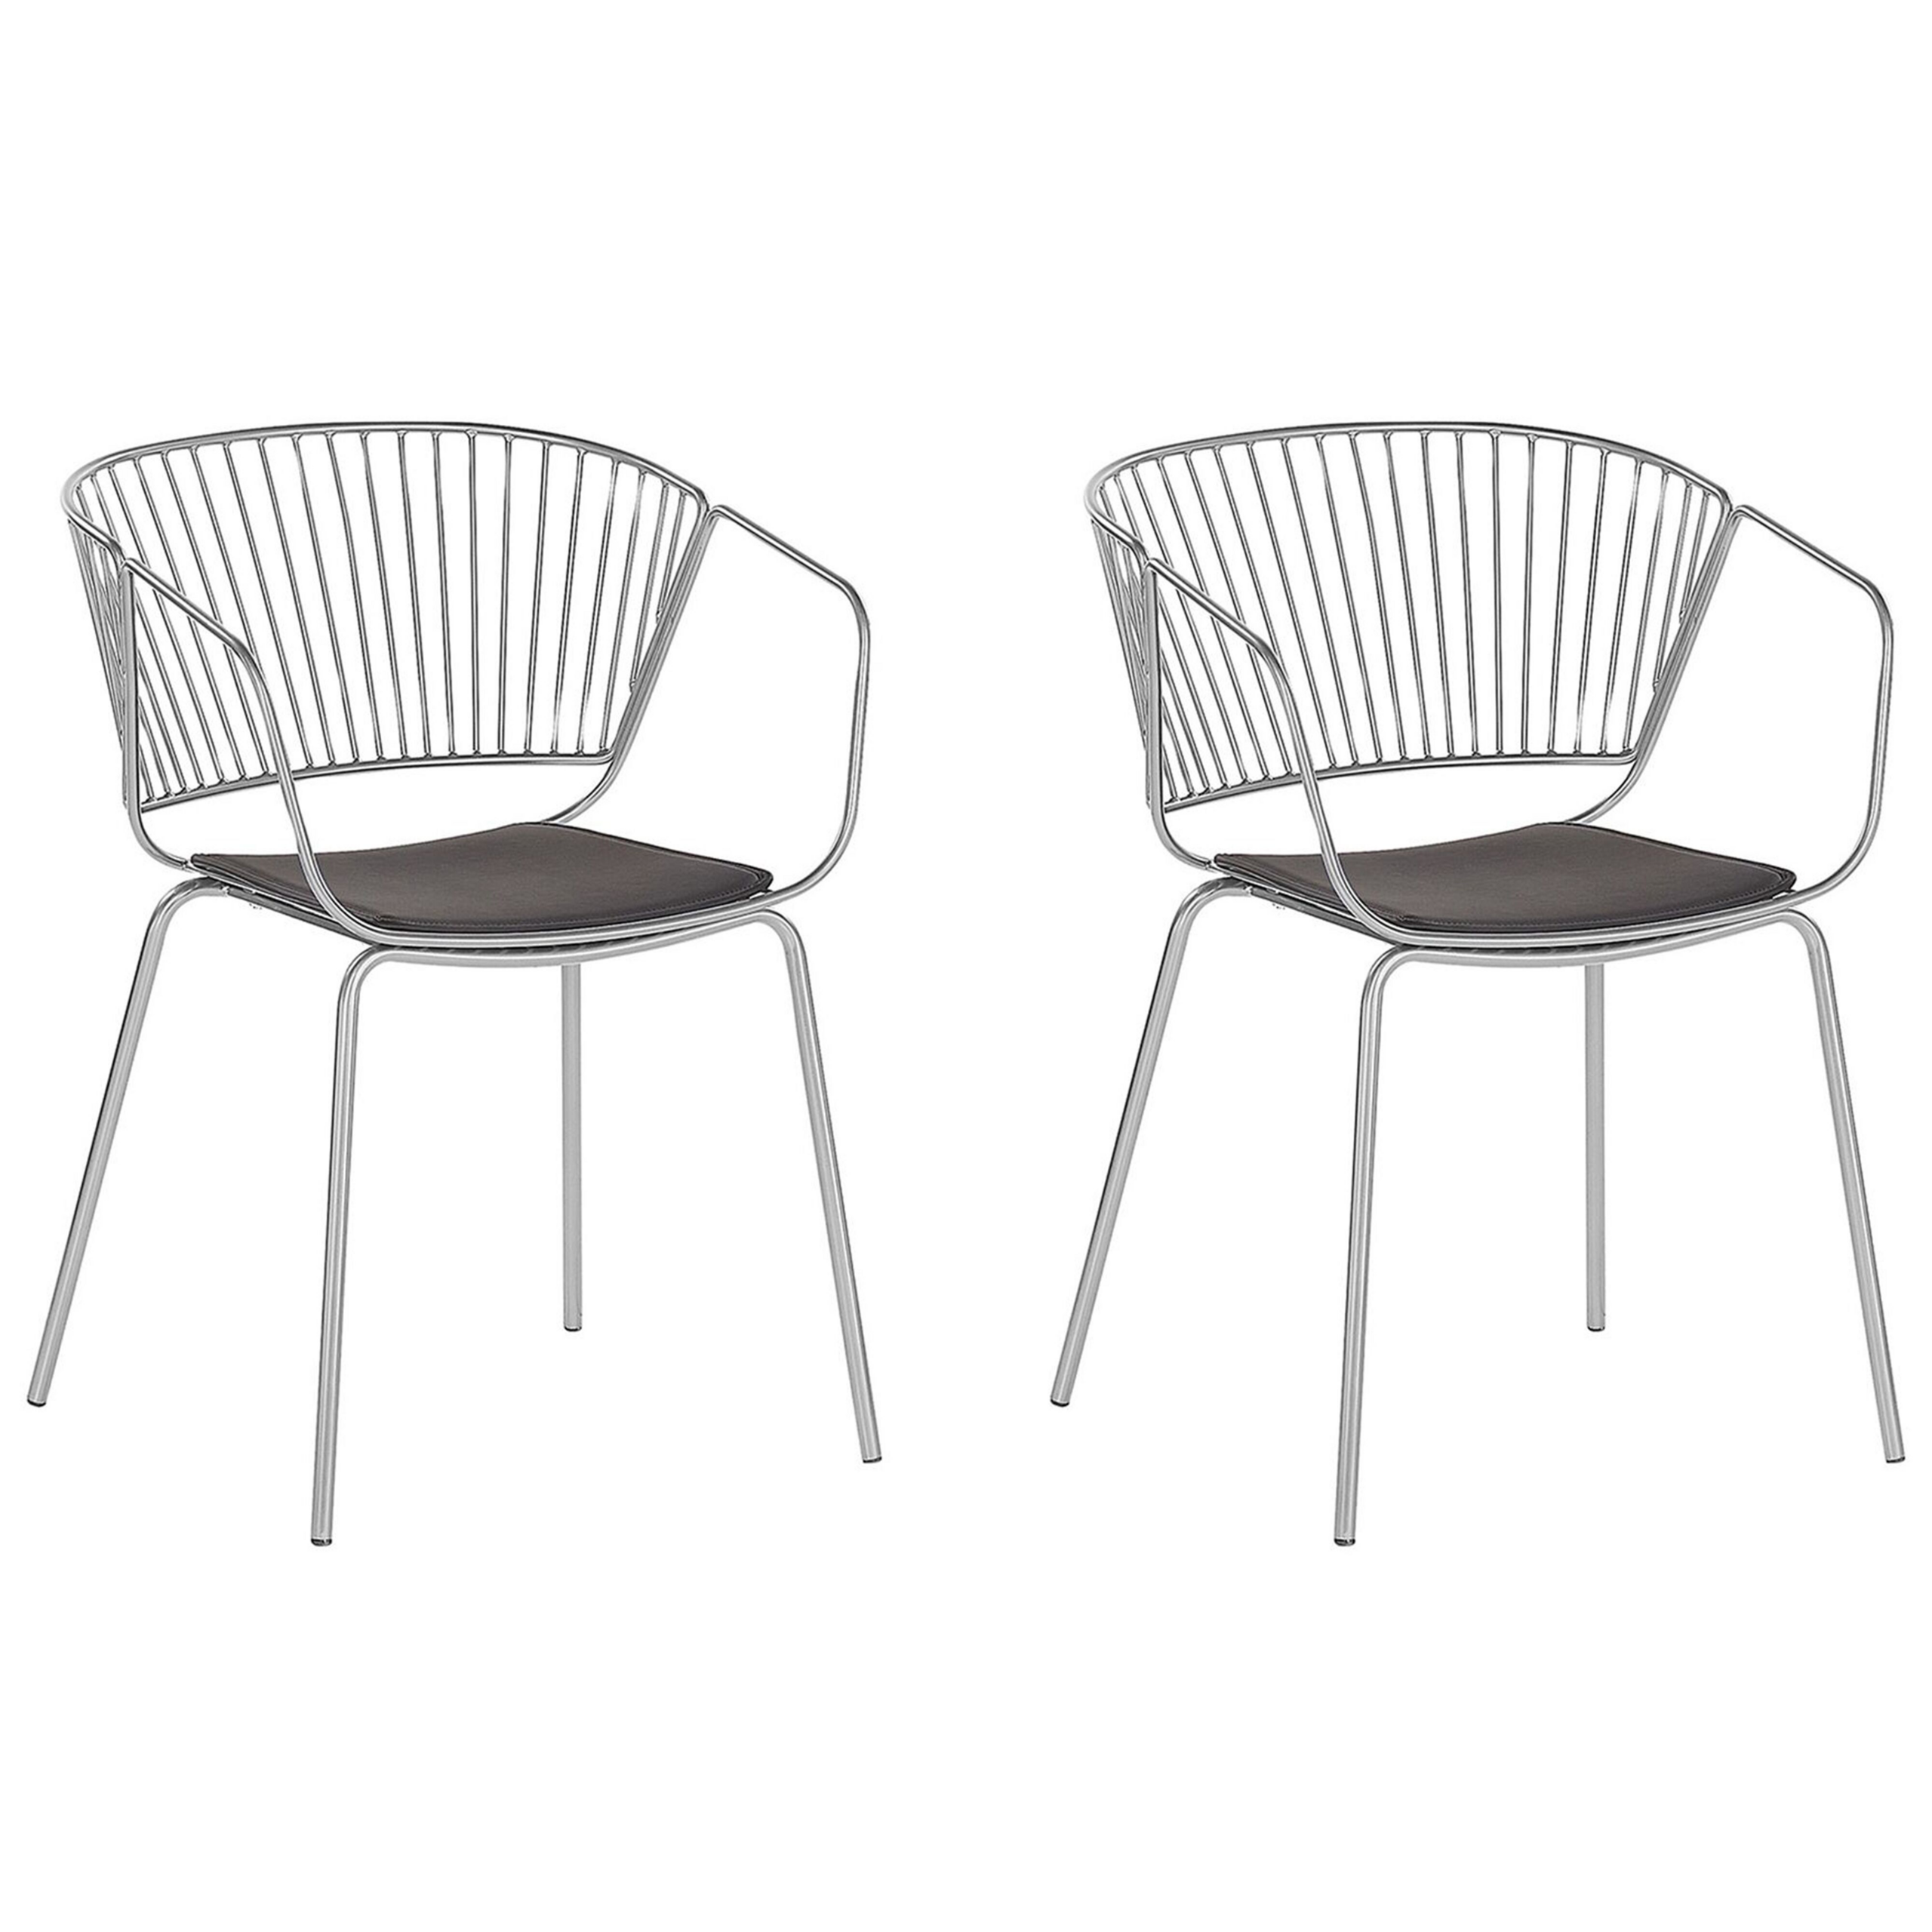 Beliani Set of 2 Dining Chairs Silver Metal Wire Design Faux Leather Black Seat Pad Accent Industrial Glam Style